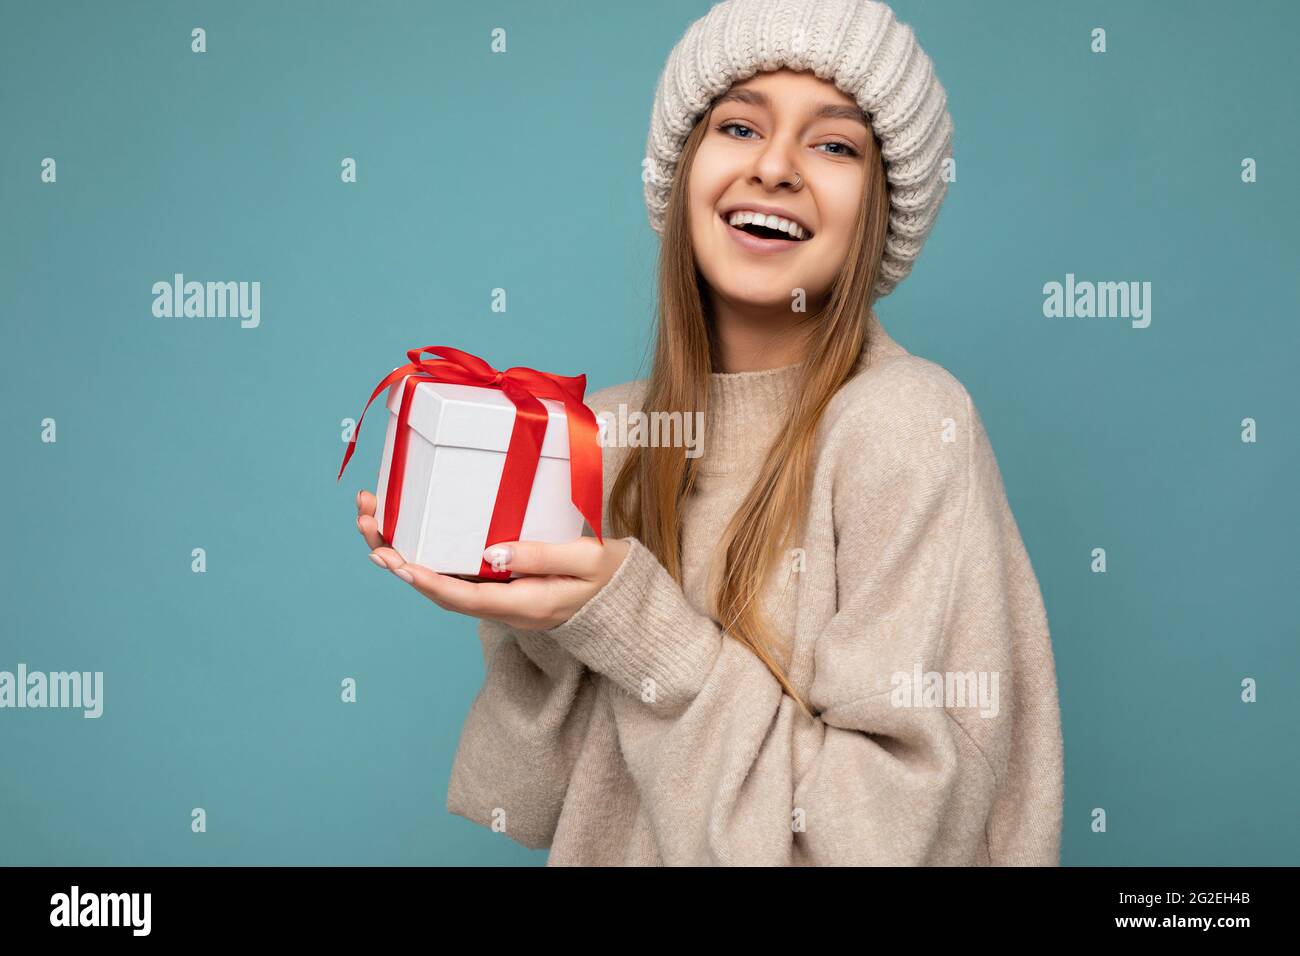 Shot of beautiful positive smiling dark blonde young woman isolated over blue background wall wearing beige warm sweater and beige knitted hat holding Stock Photo